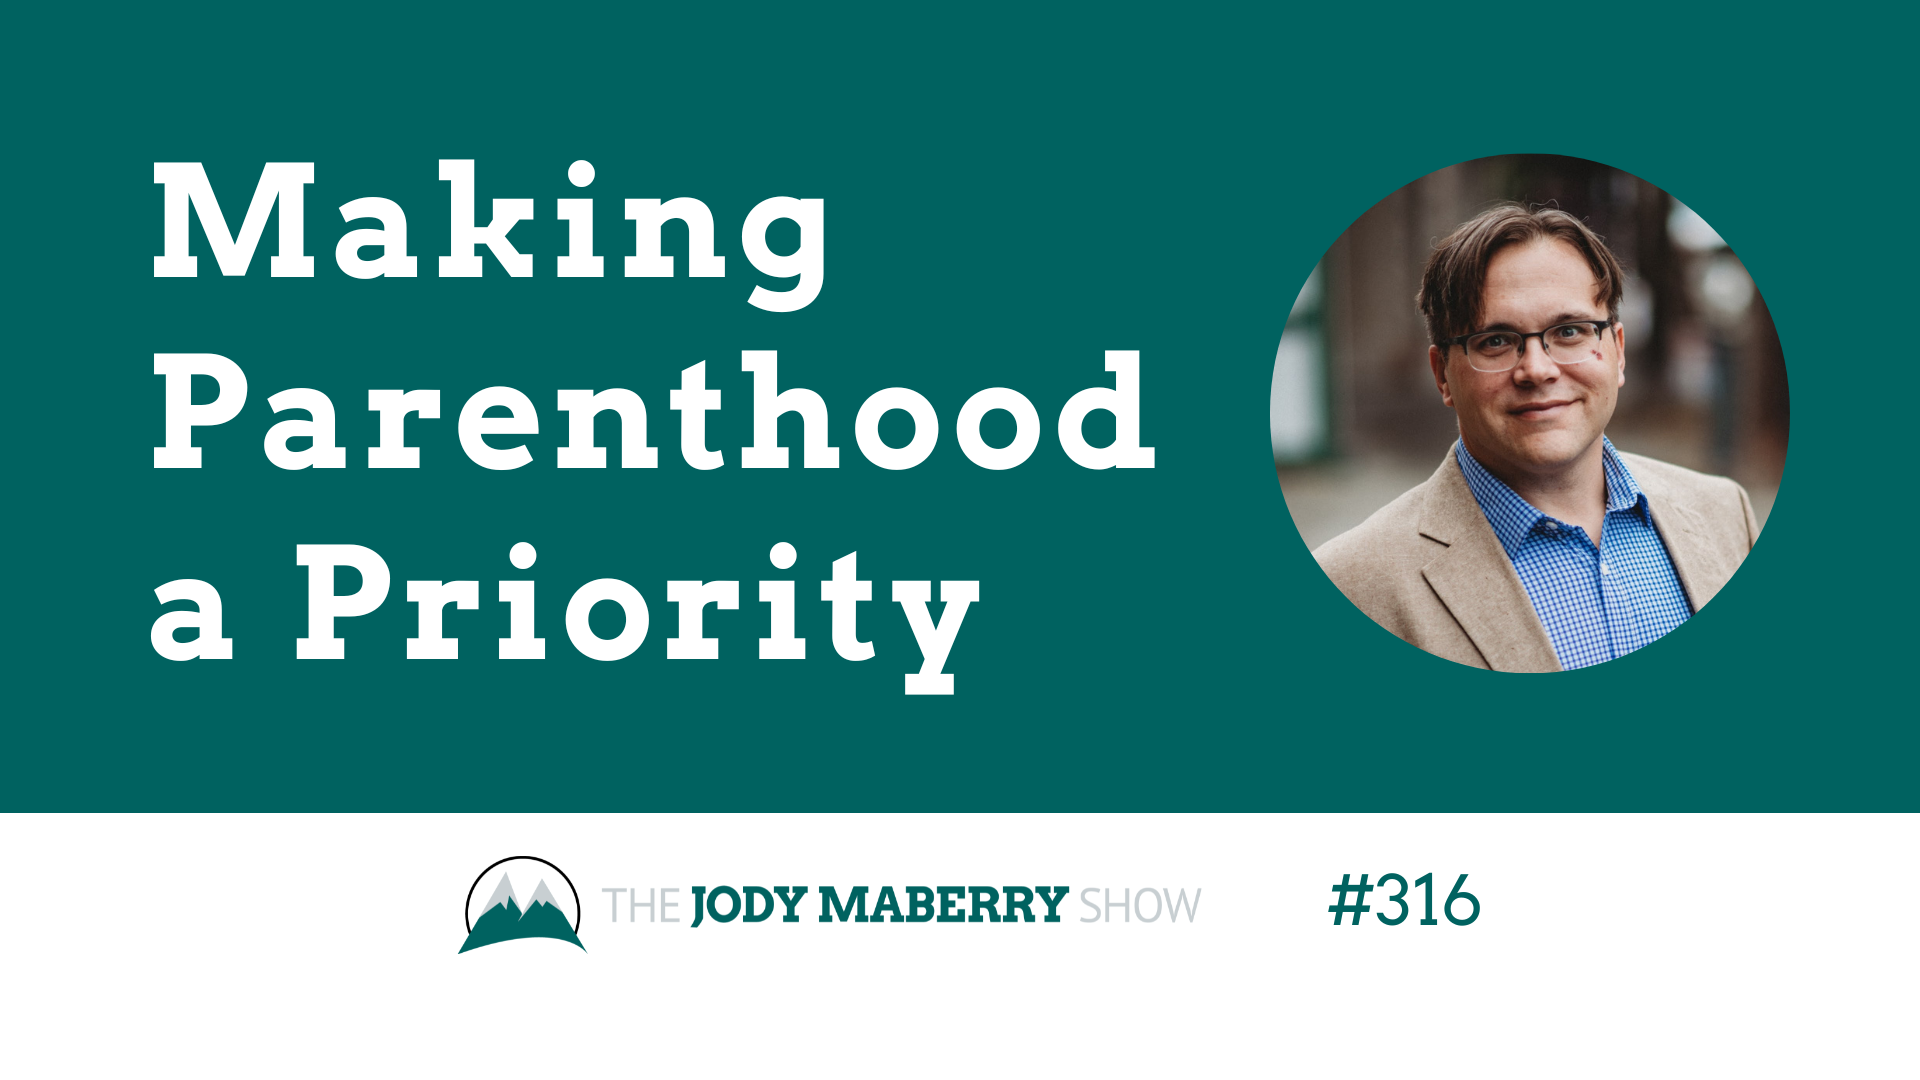 Jody Maberry Show Episode 316 Making parenthood a priority